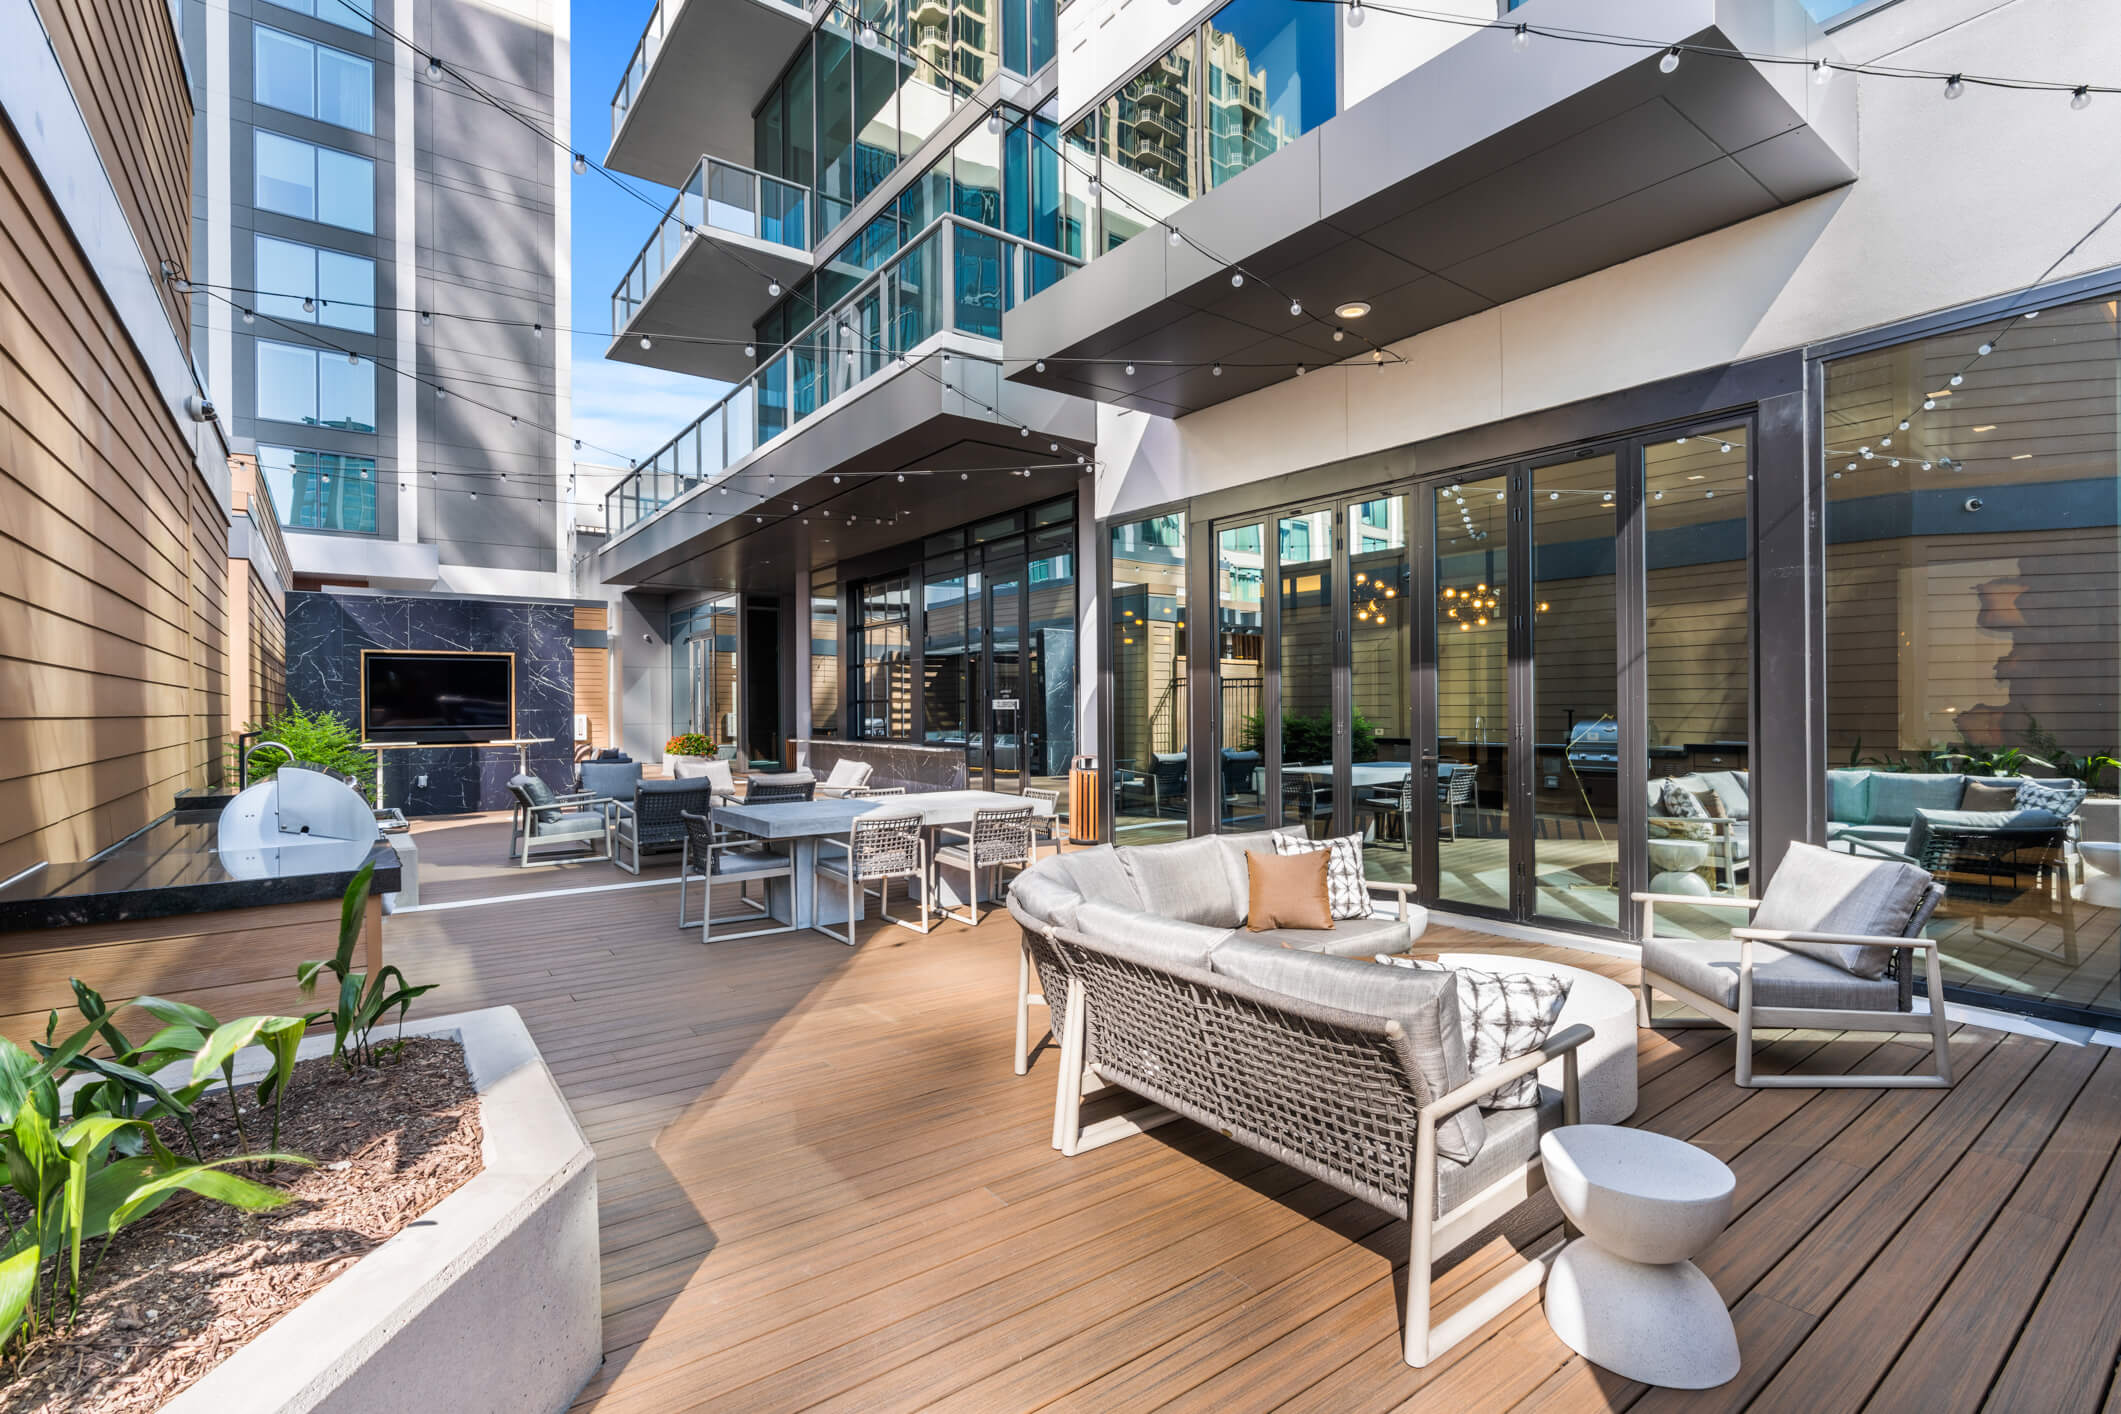 A courtyard view at the 40 West 12th condominium tower.